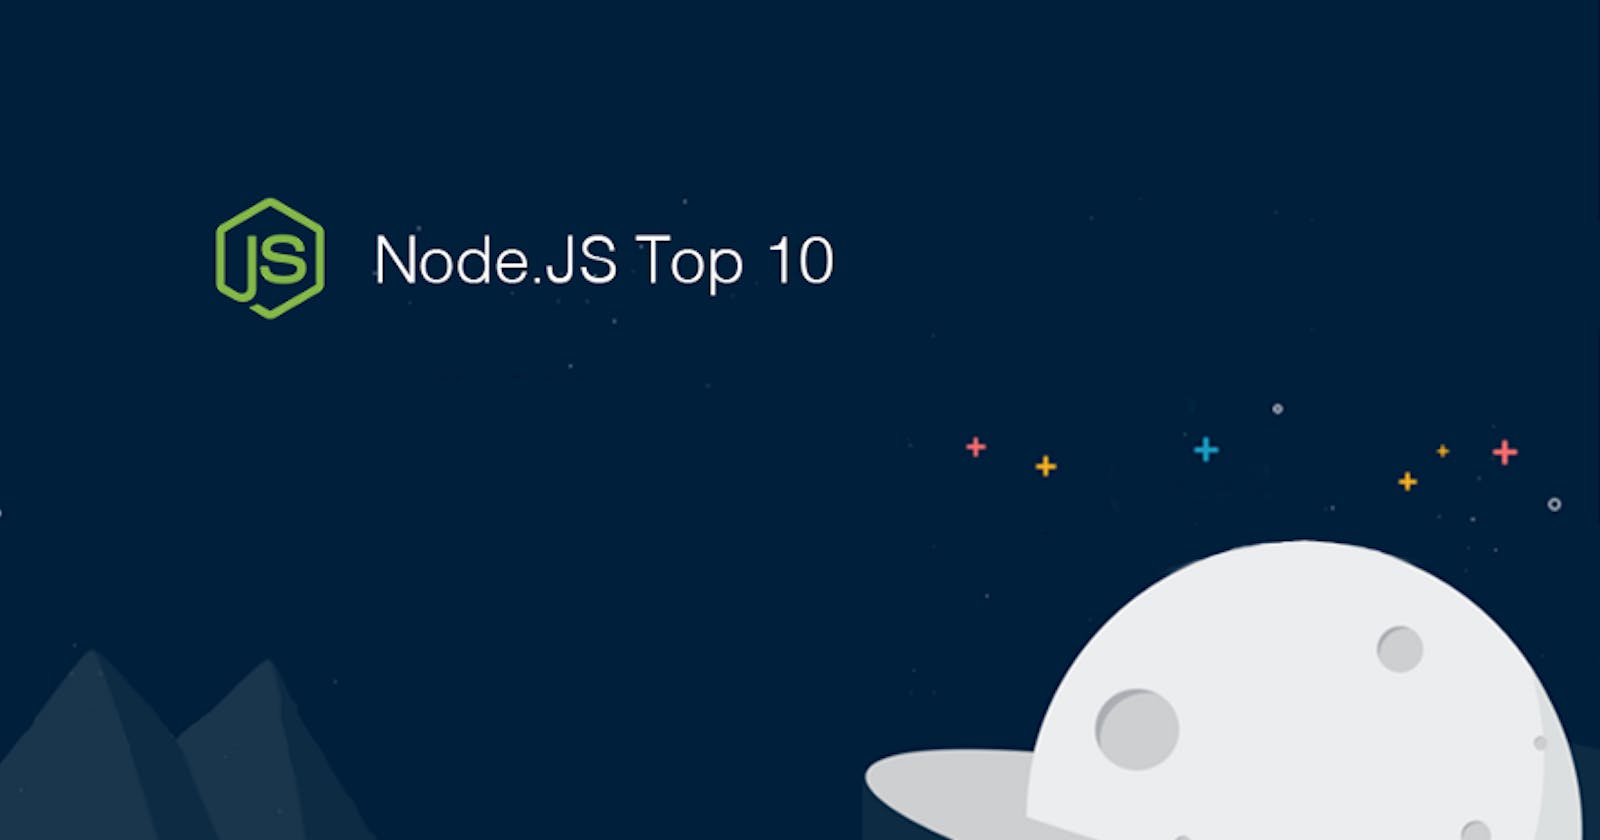 Node.JS Top 10 Articles for the Past Month (v.May 2017)